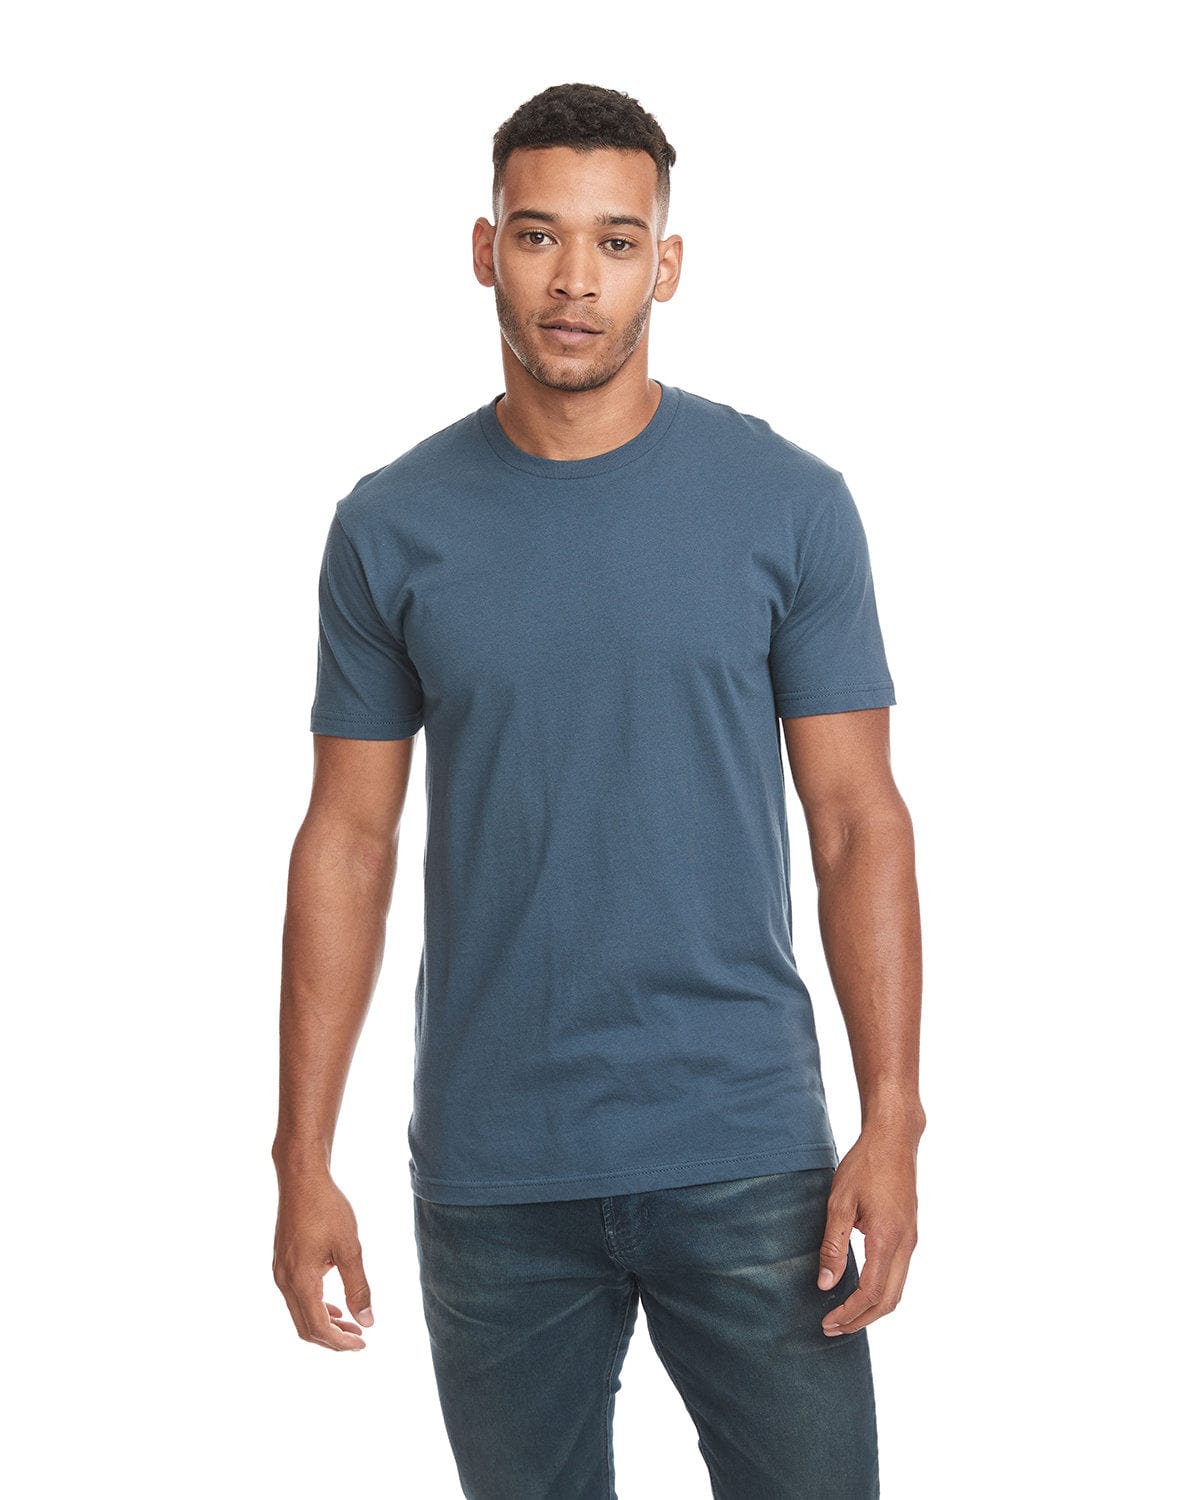 Next Level 3600 T Shirts – CheapesTees